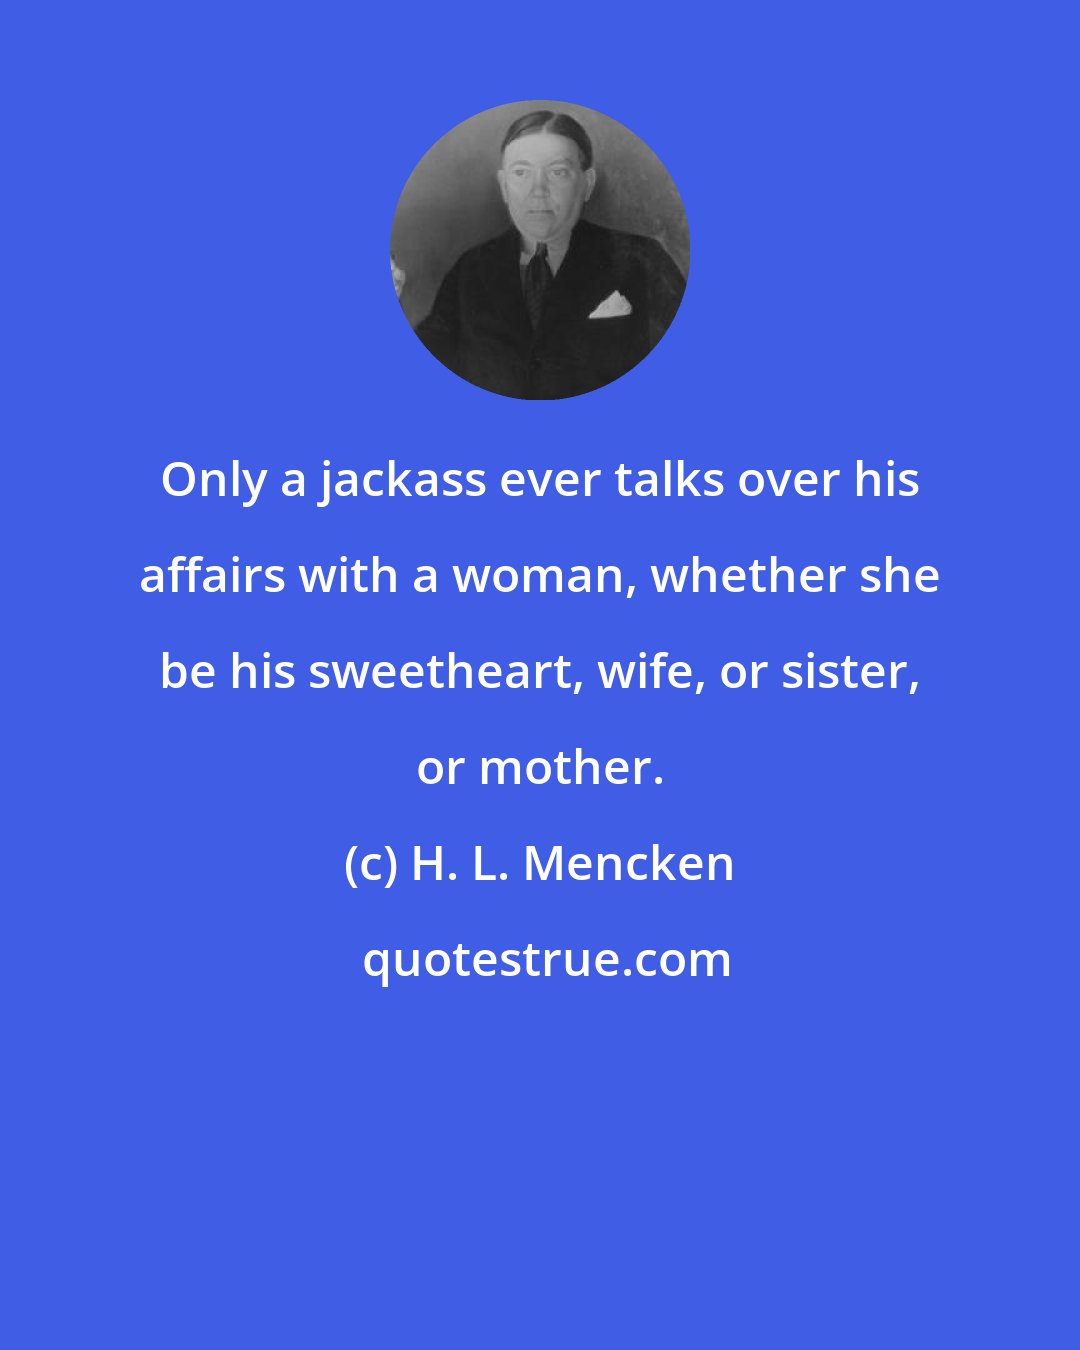 H. L. Mencken: Only a jackass ever talks over his affairs with a woman, whether she be his sweetheart, wife, or sister, or mother.